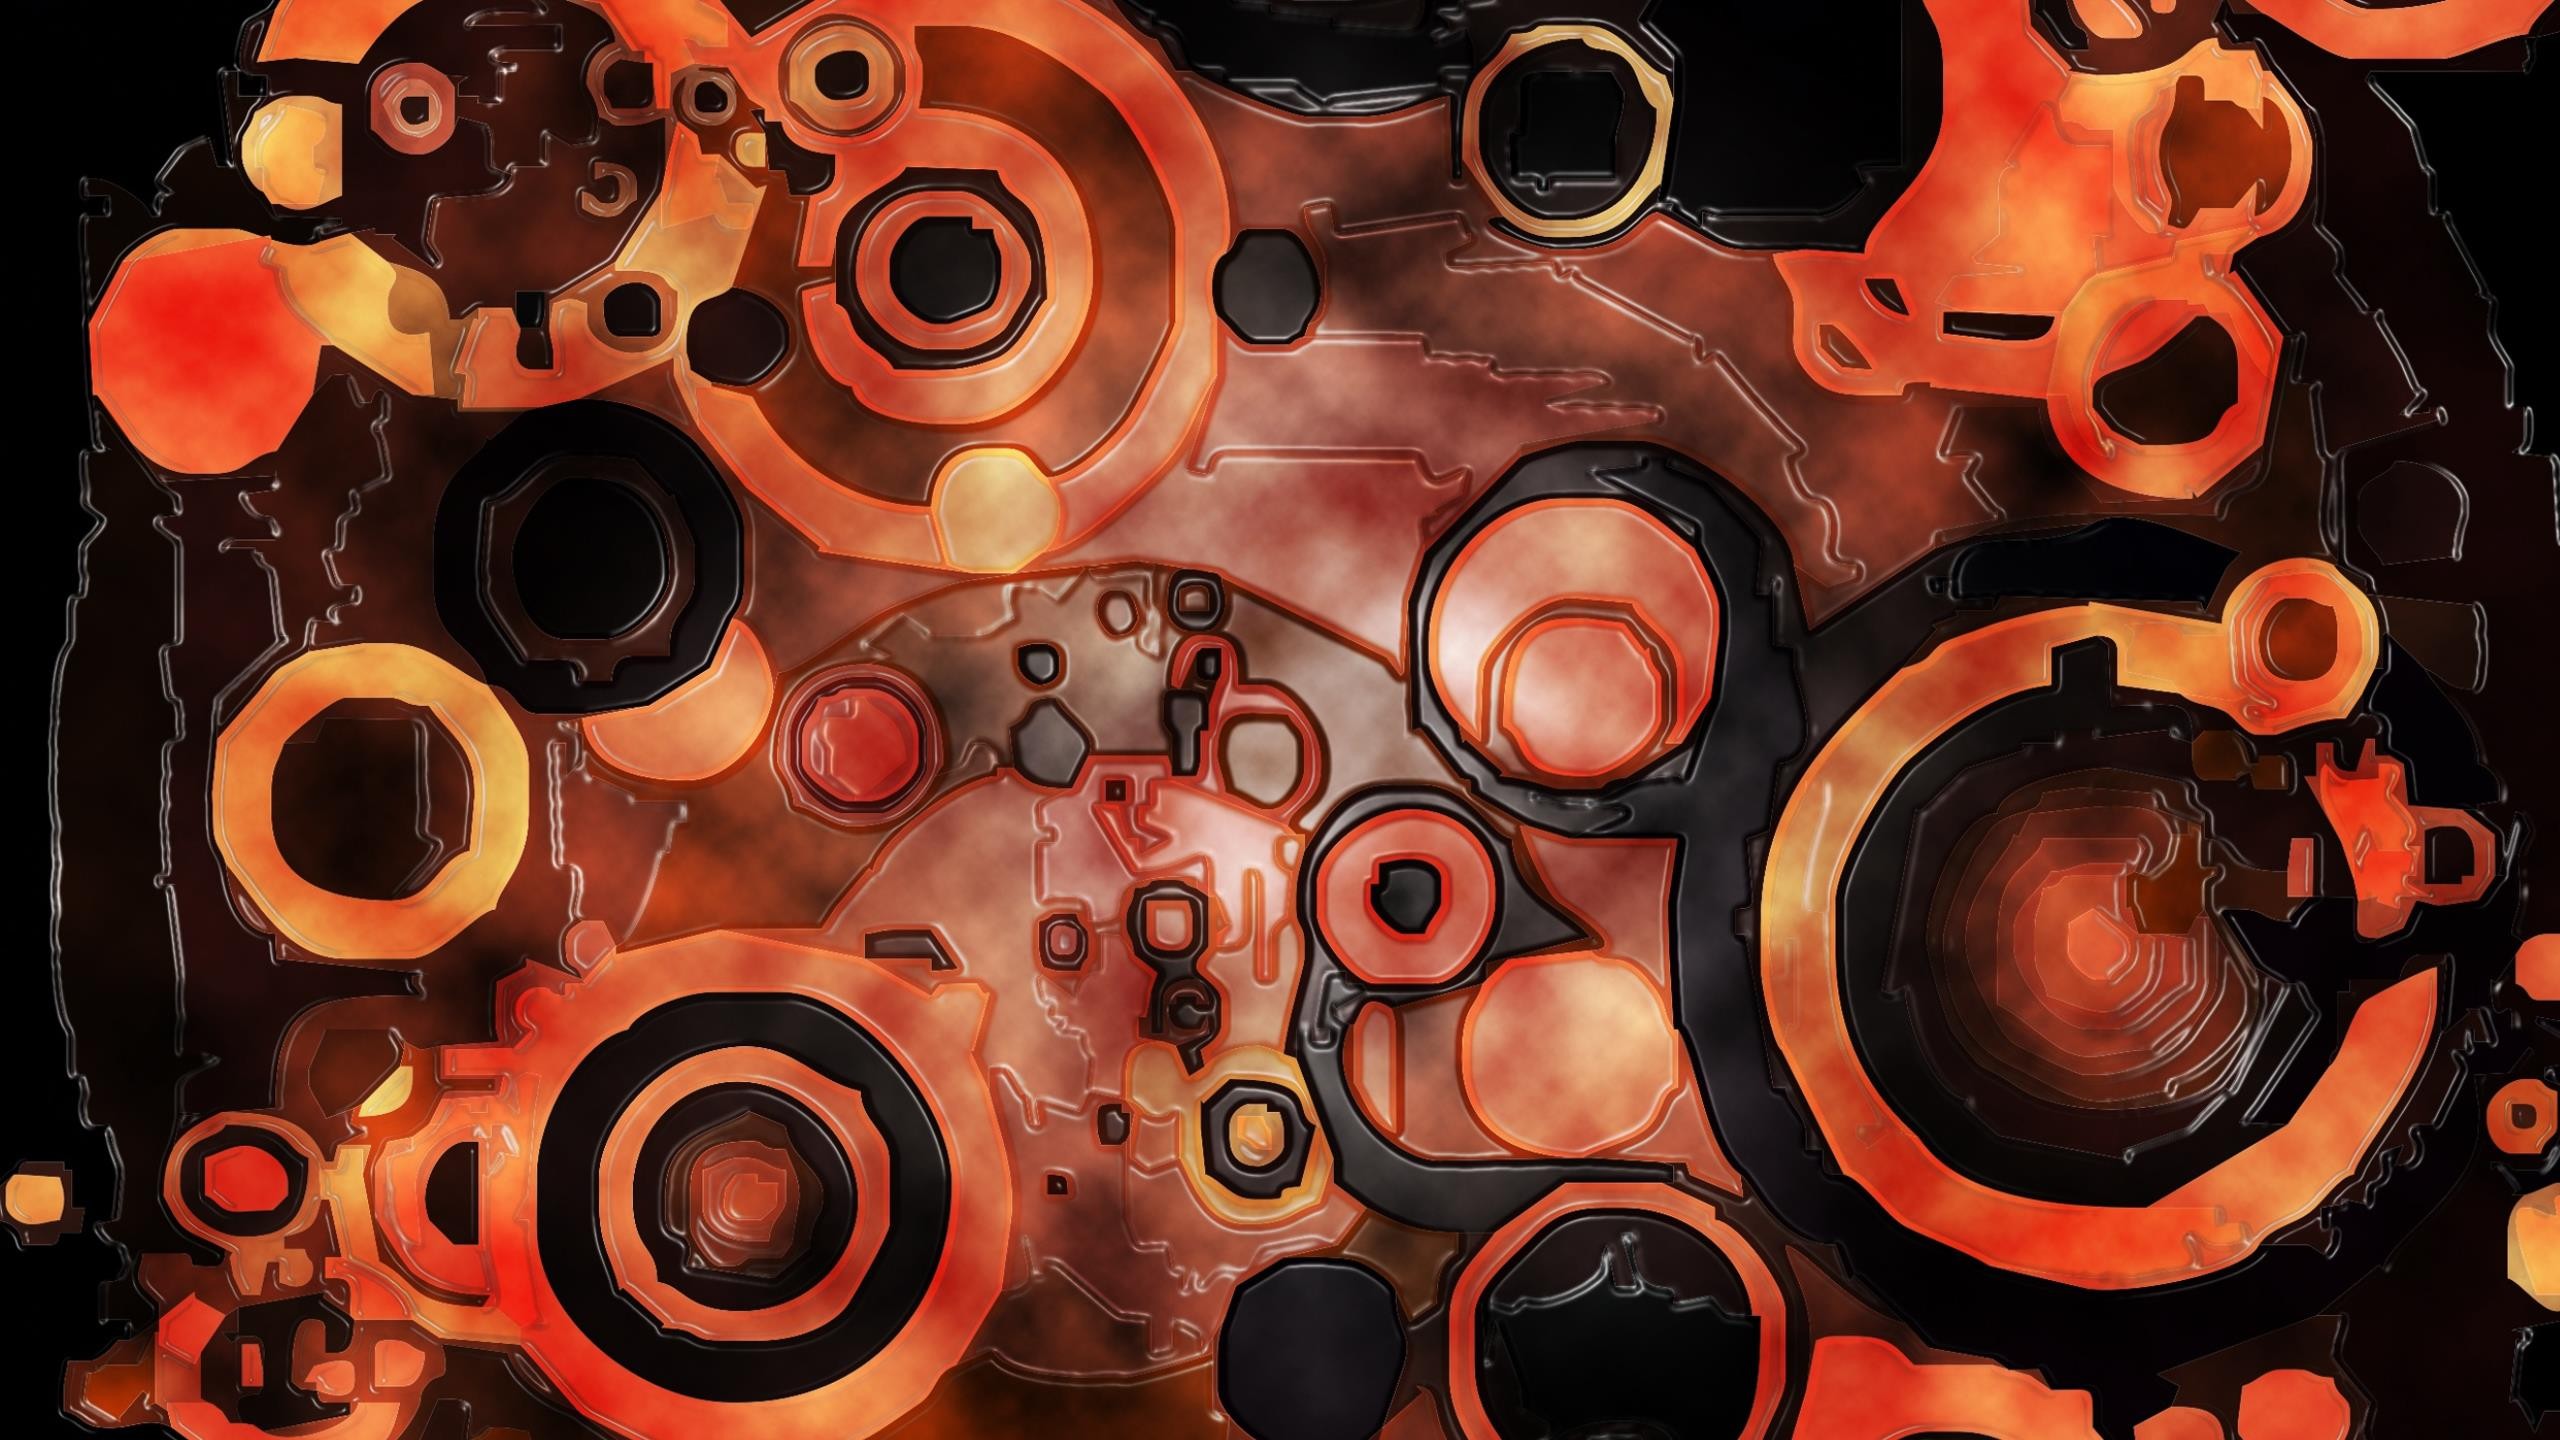 General 2560x1440 digital art circle abstract colorful red orange